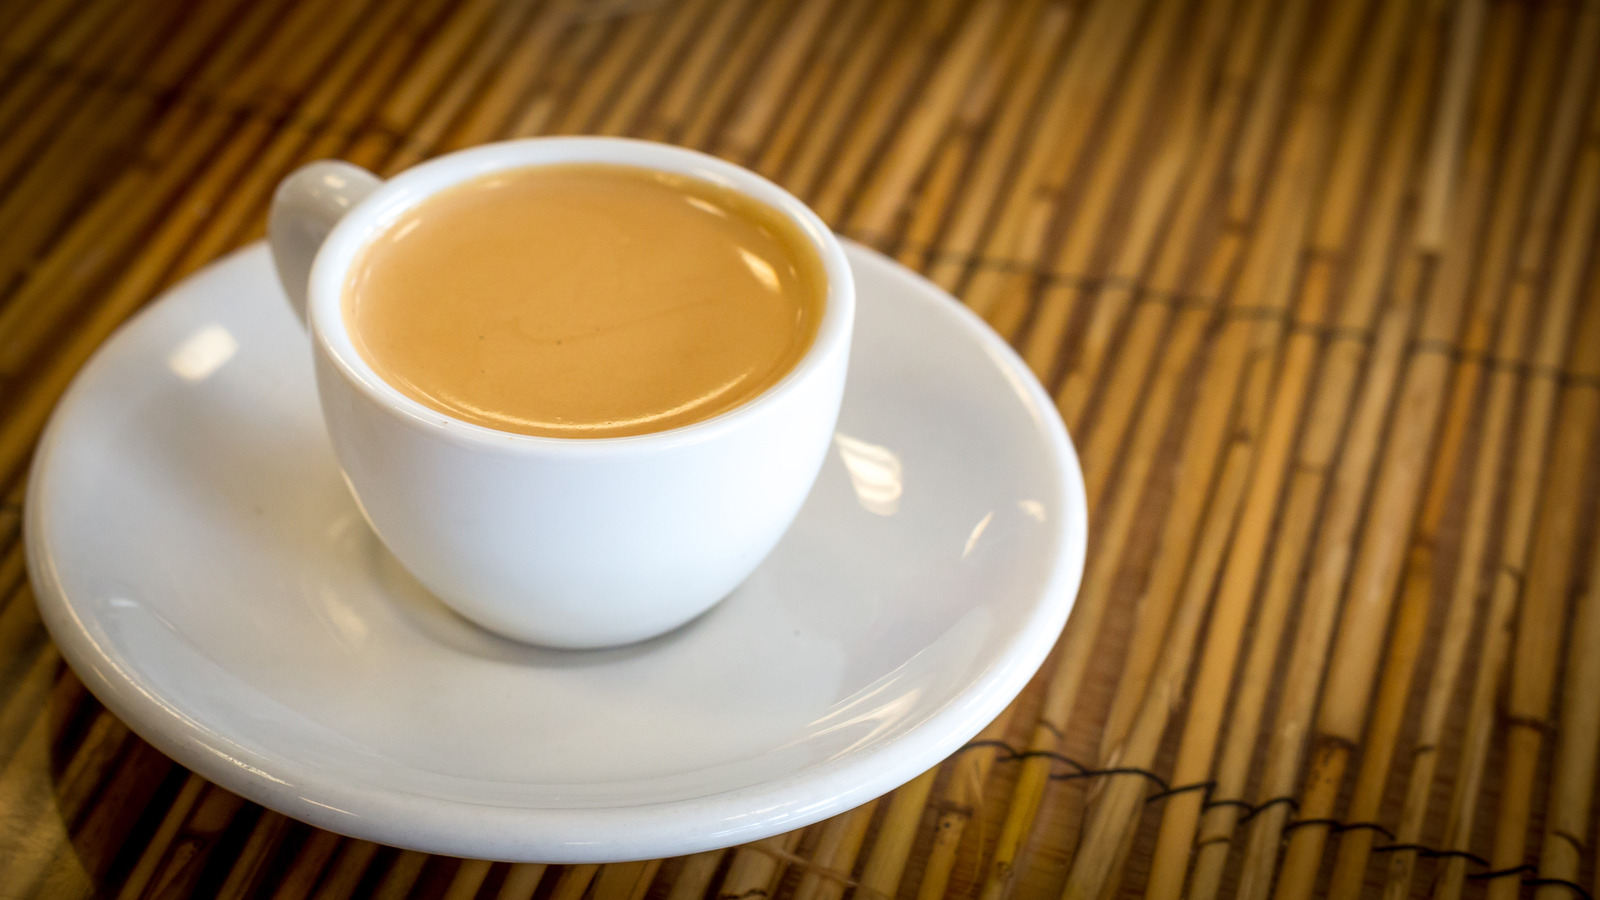 https://www.thedailymeal.com/img/gallery/what-is-a-cuban-coffee-and-what-does-it-taste-like/l-intro-1697723842.jpg